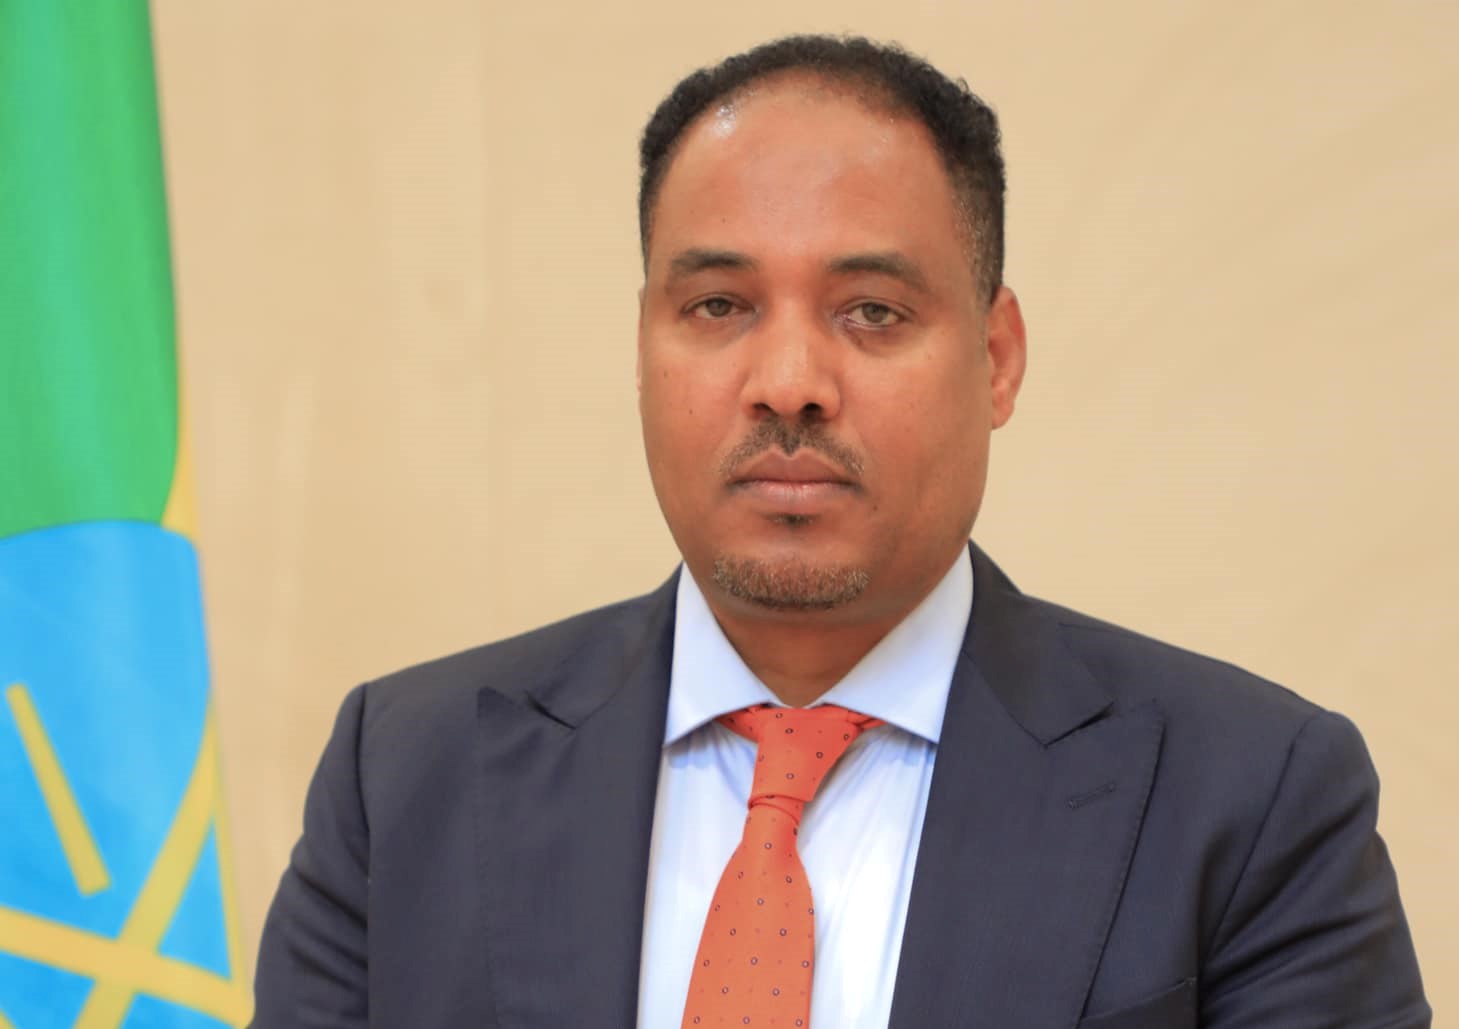 PM Abiy Ahmed appoints Mesganu Arga as State Minister of MFA Ethiopia ...